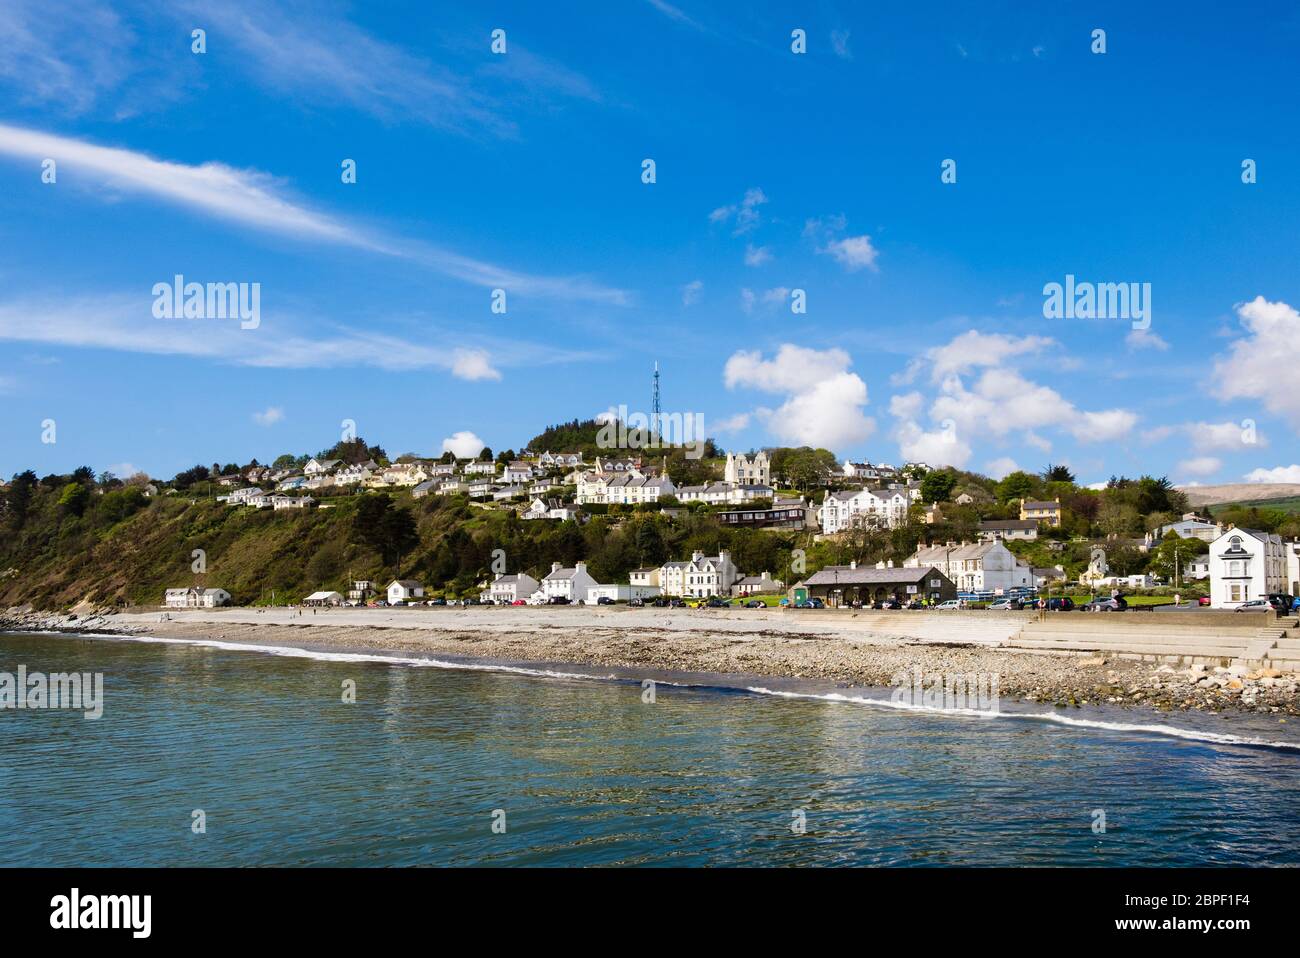 View across the sea to the seafront and beach. Laxey, Isle of Man, British Isles Stock Photo